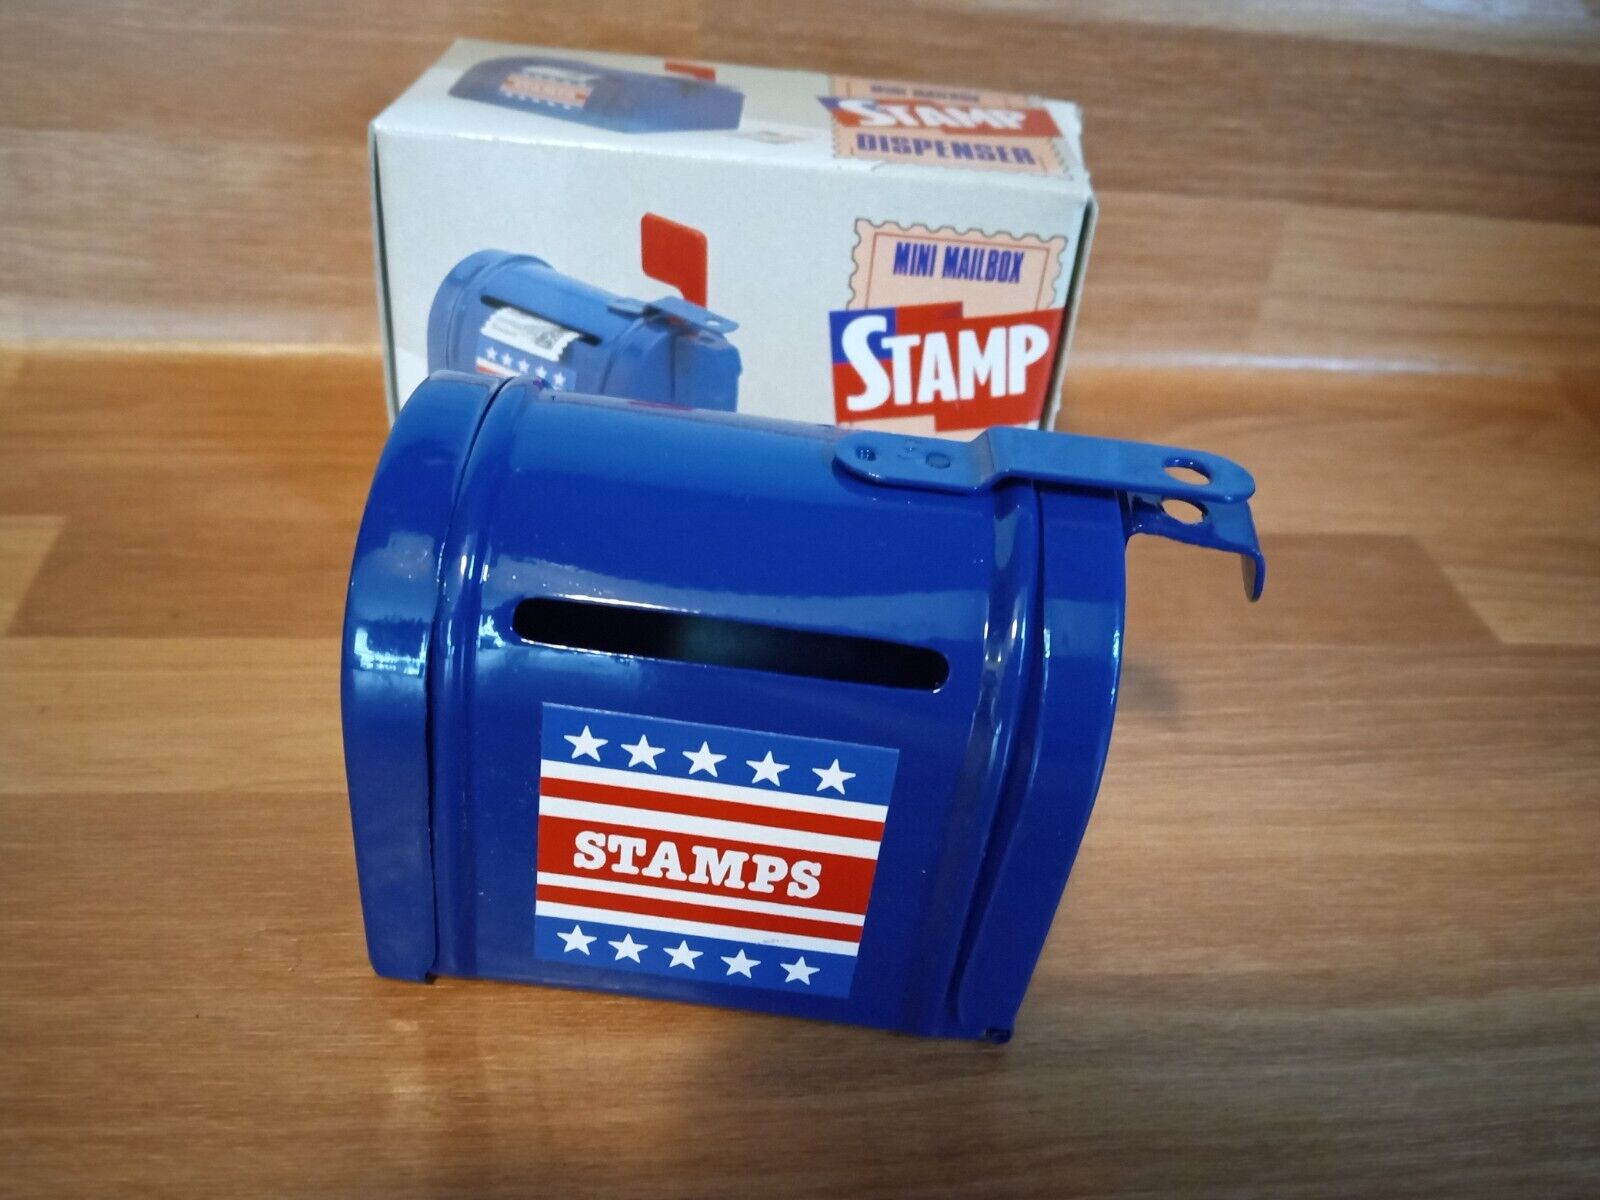 Vintage Metal Mini Mailbox USPS Stamp Dispenser New in Box GiftCo Office Desk